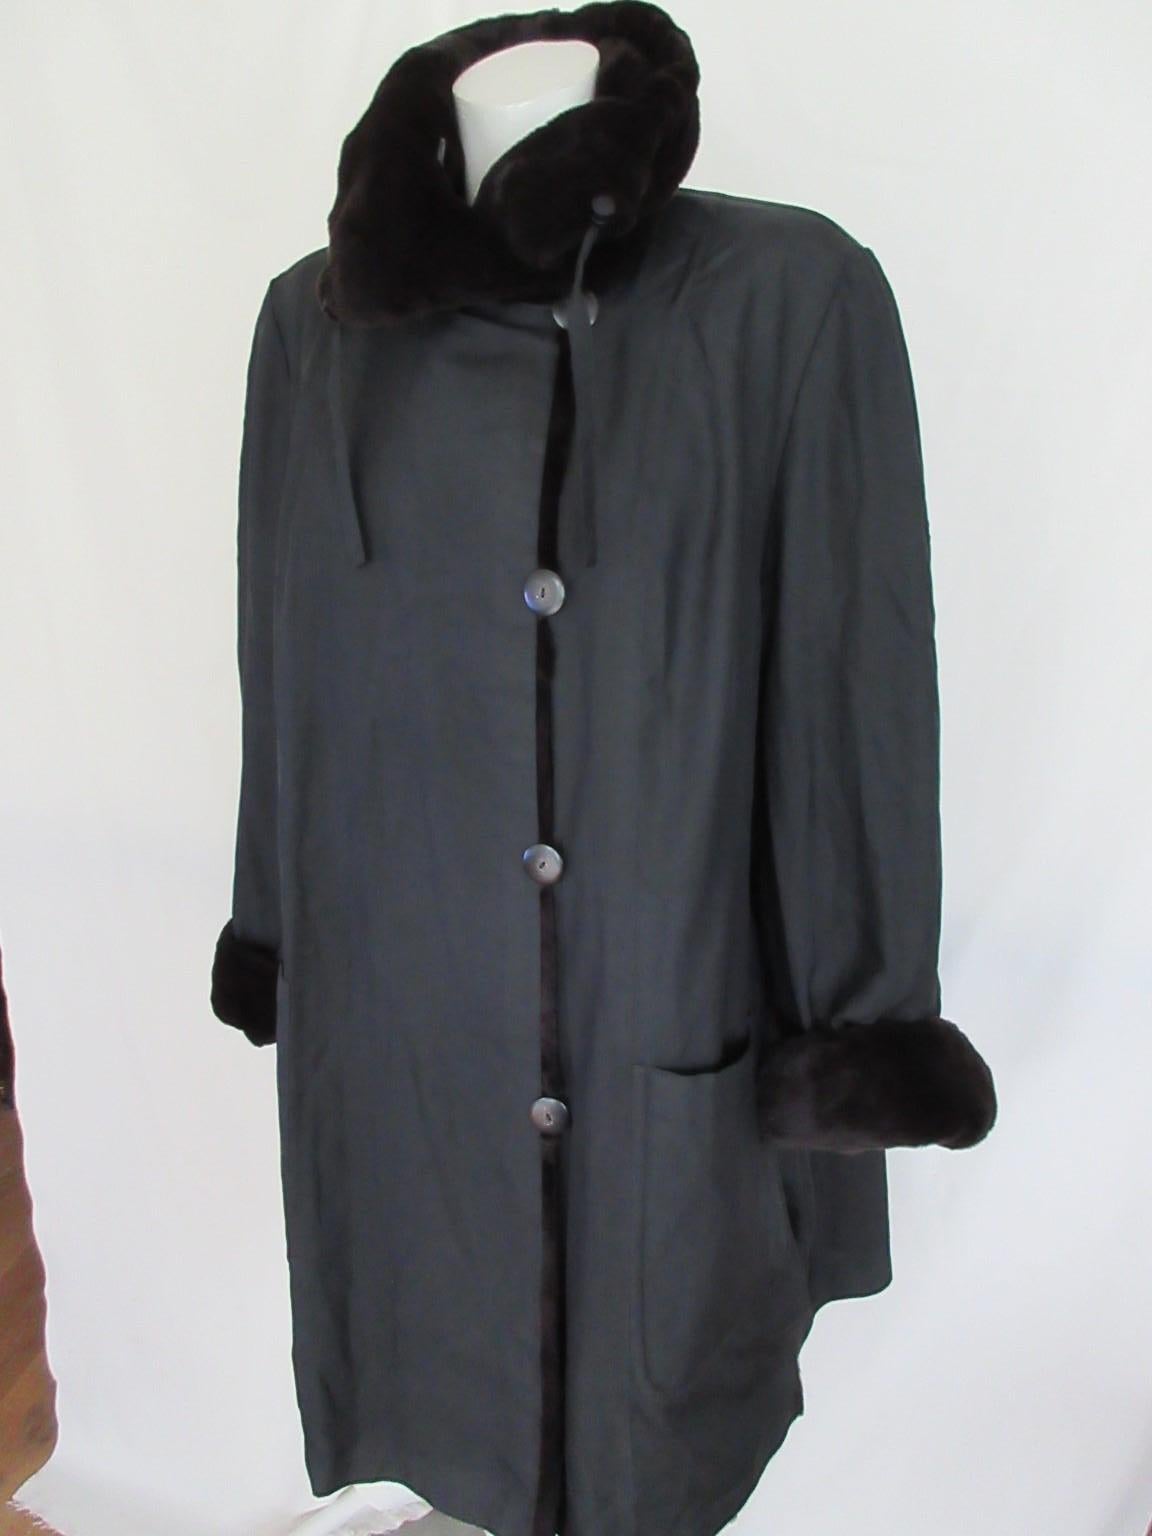 Reversible Sheared Mink Fur Coat In Good Condition For Sale In Amsterdam, NL